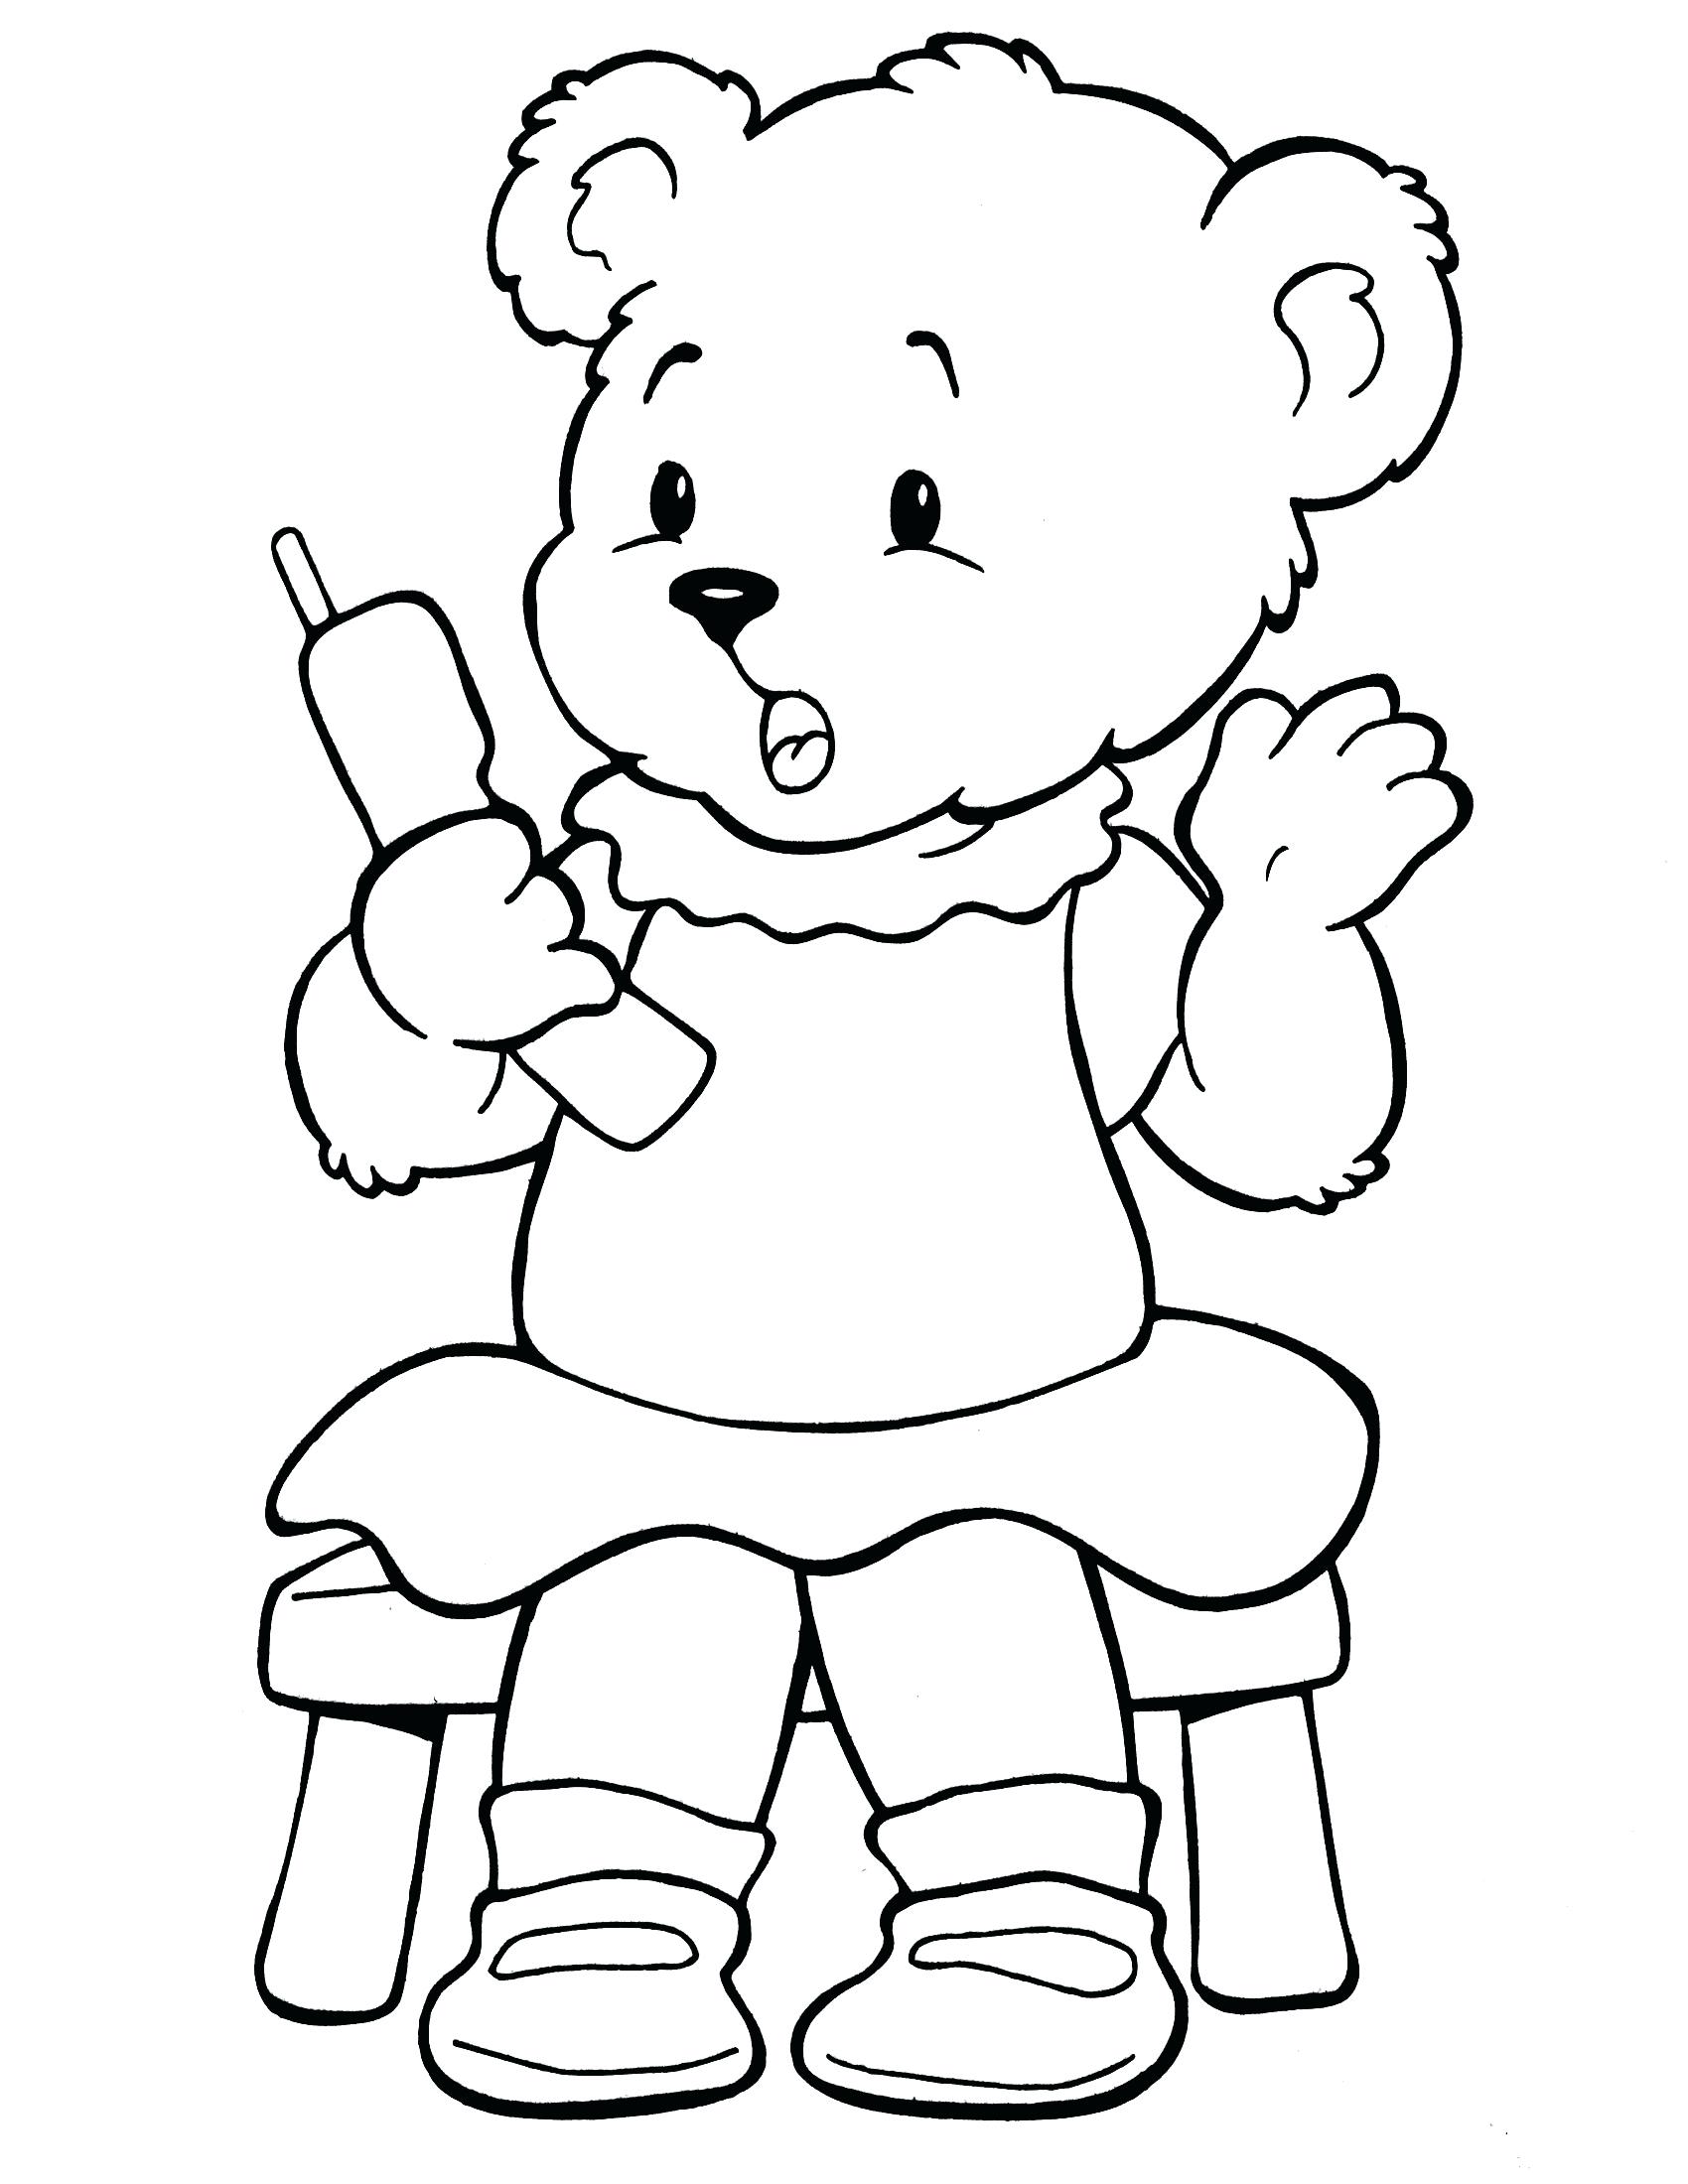 Make Your Own Coloring Pages For Free At GetColorings Free 